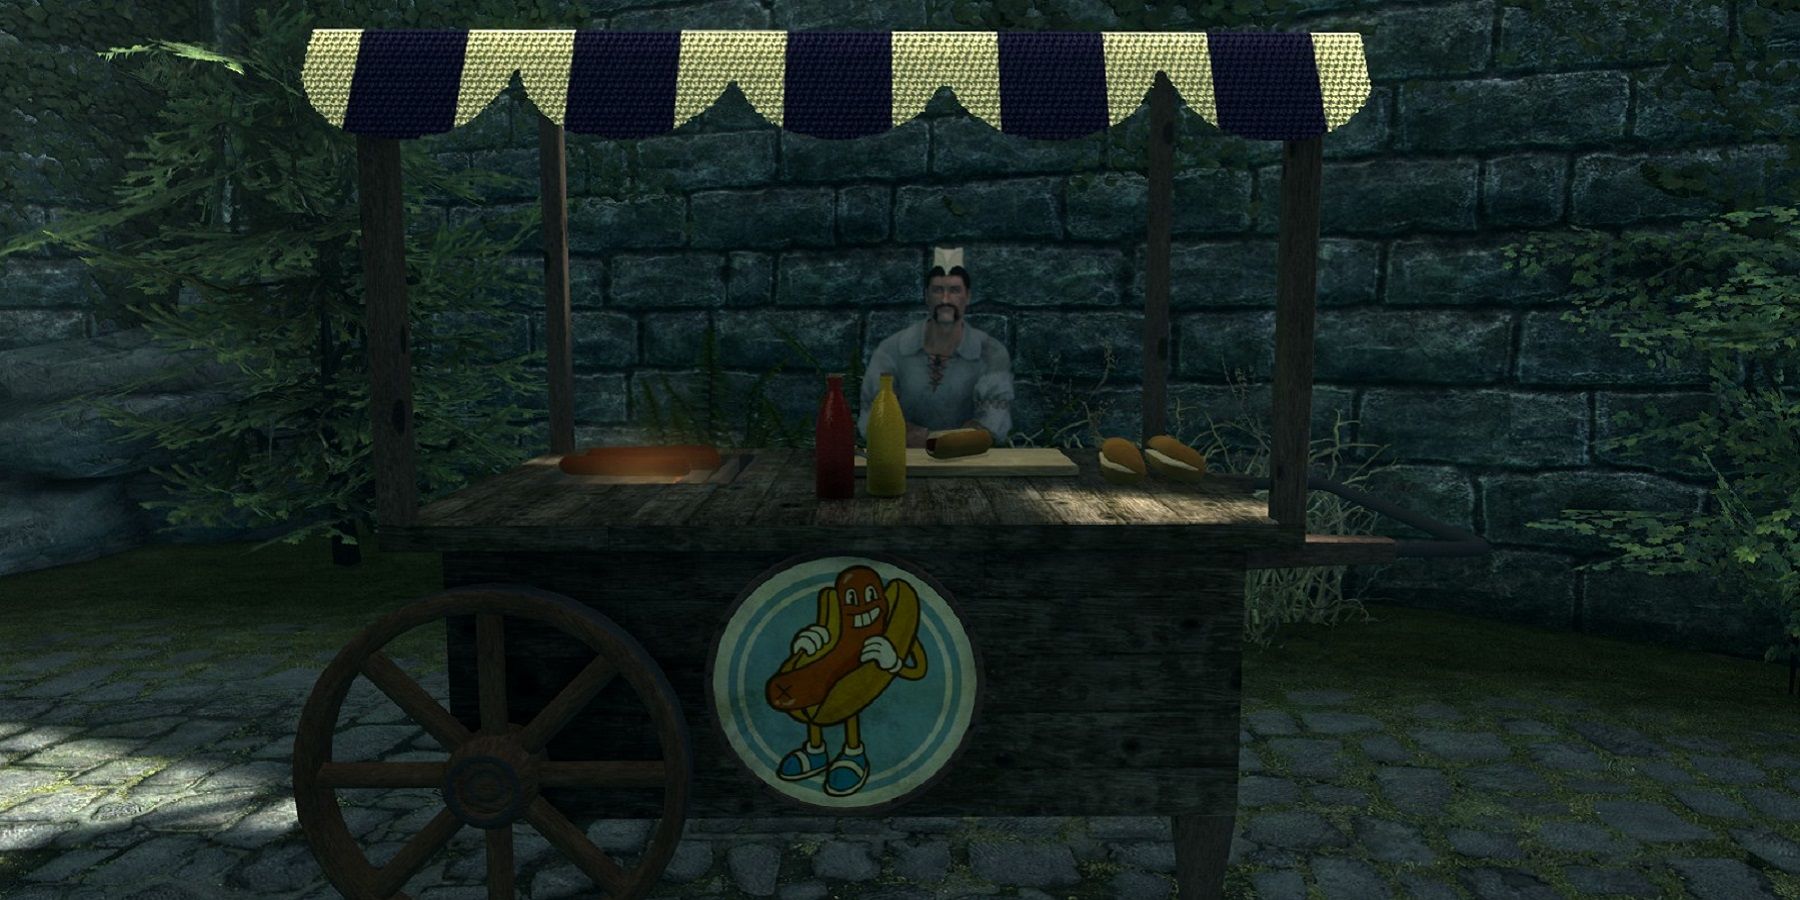 Image from Skyrim showing a hot dog stall.